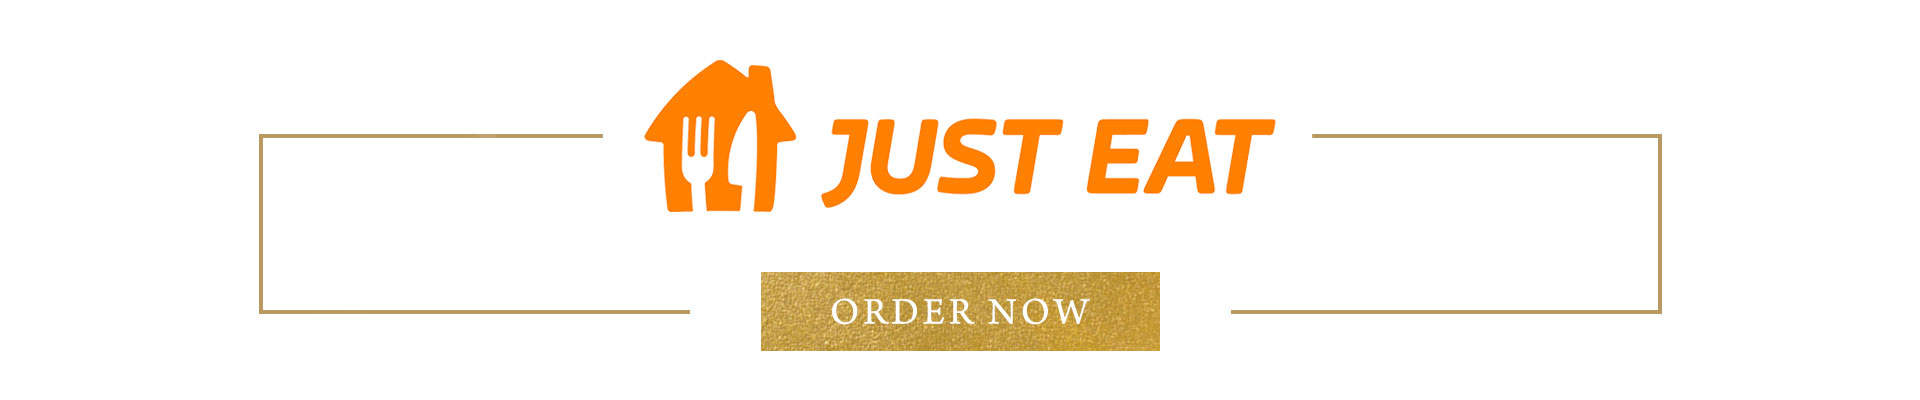 pcp-core-justeat-justeat-banner.jpg